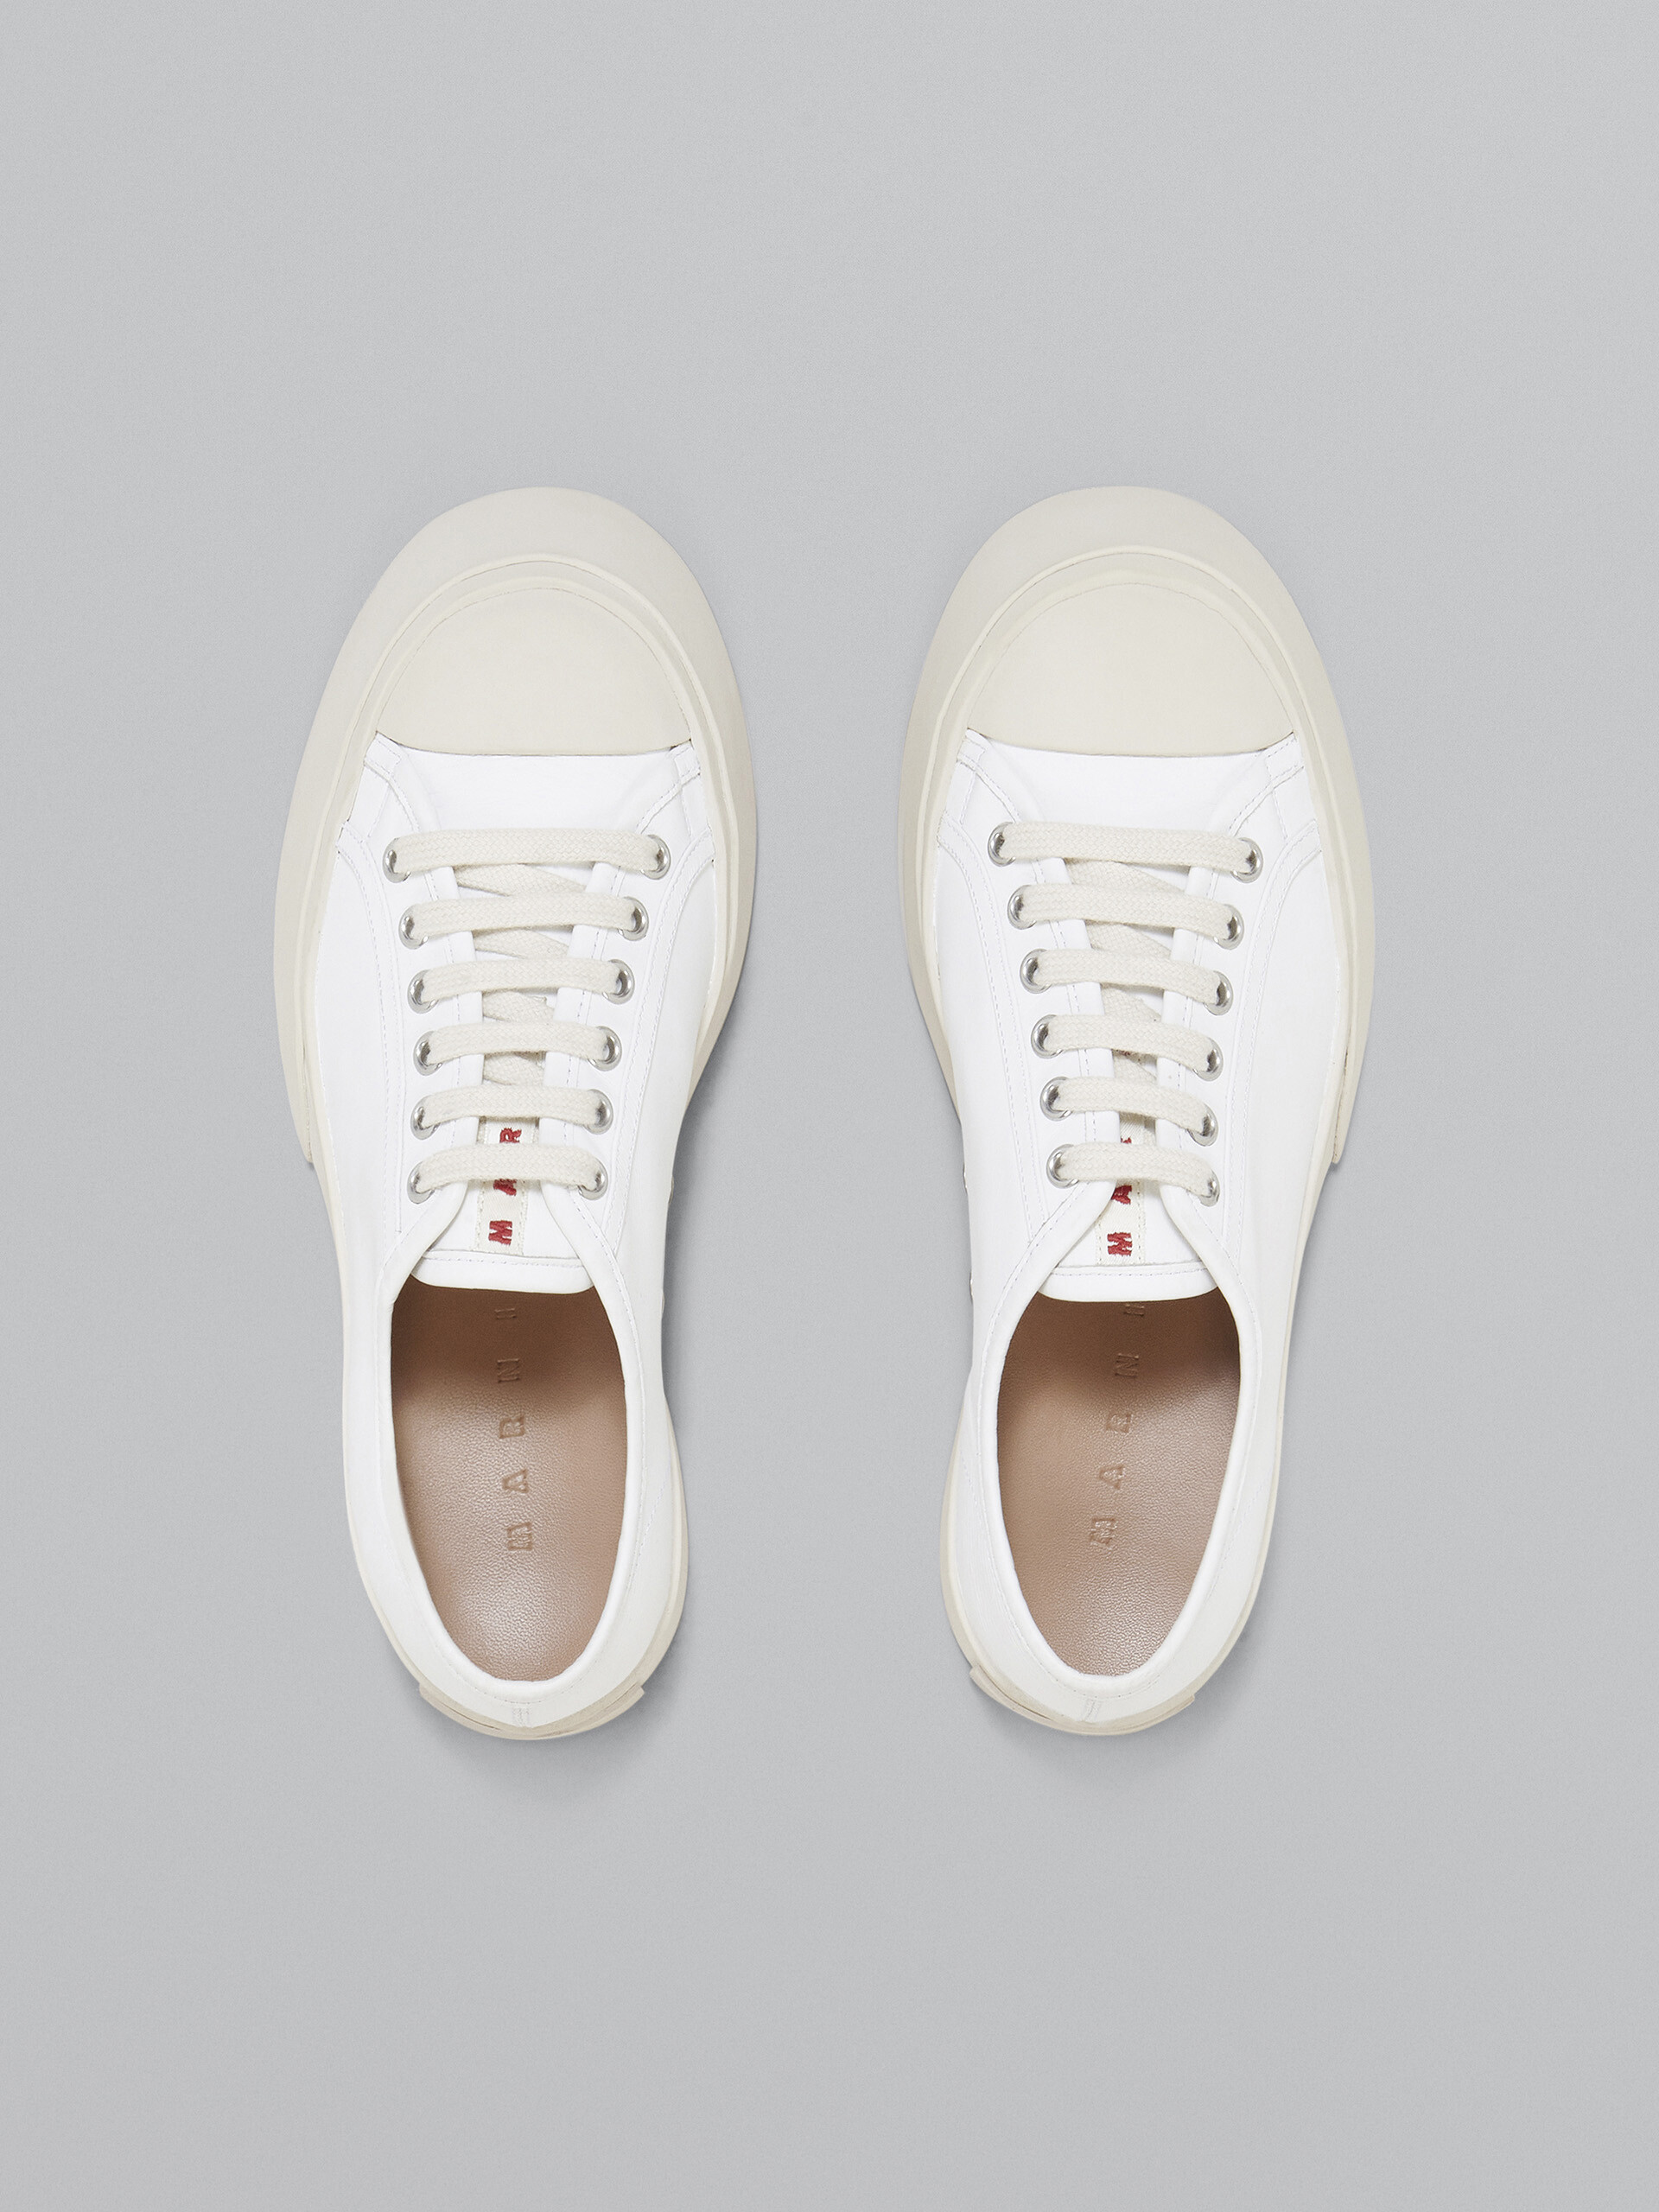 White nappa leather PABLO sneaker - Sneakers - Image 4